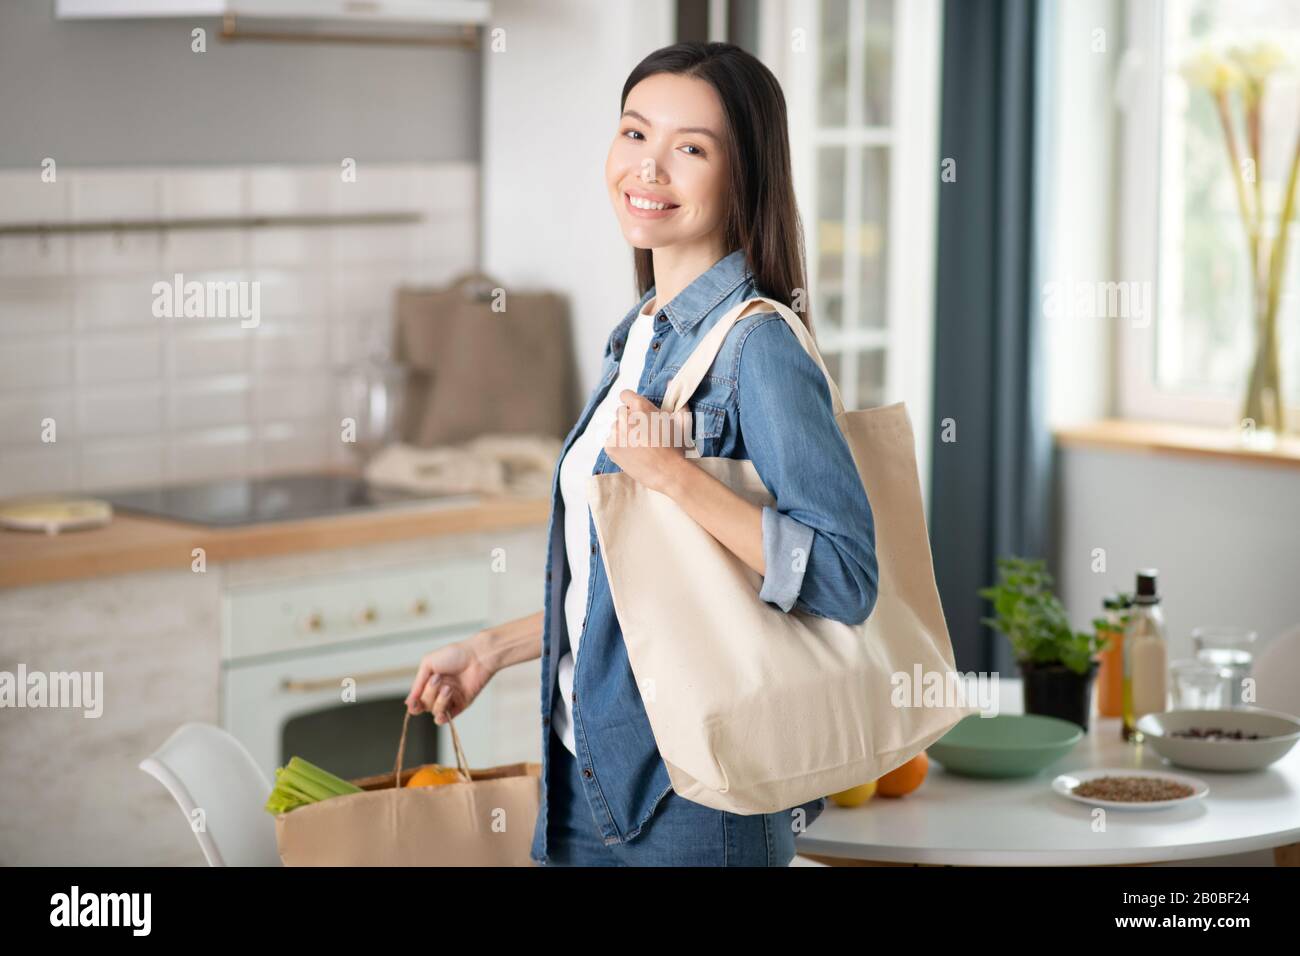 Smiling young woman with eco bags at home. Stock Photo